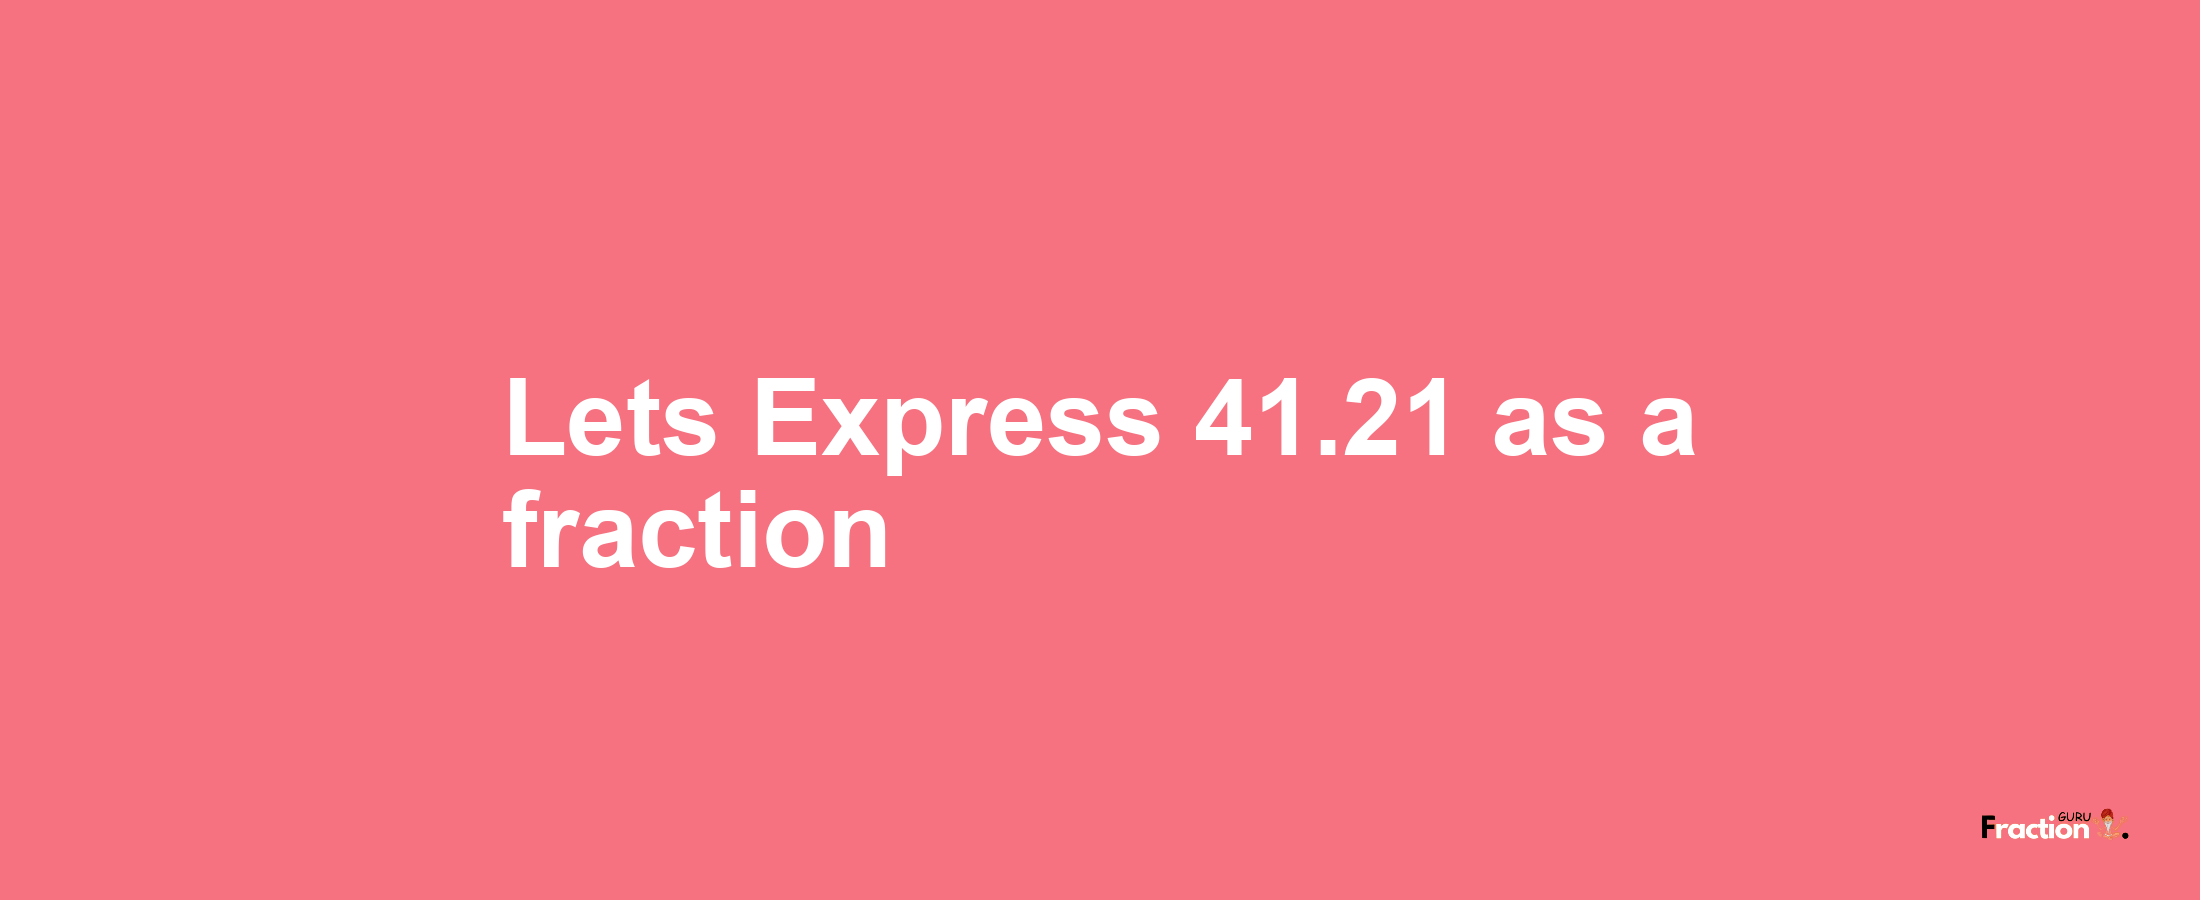 Lets Express 41.21 as afraction